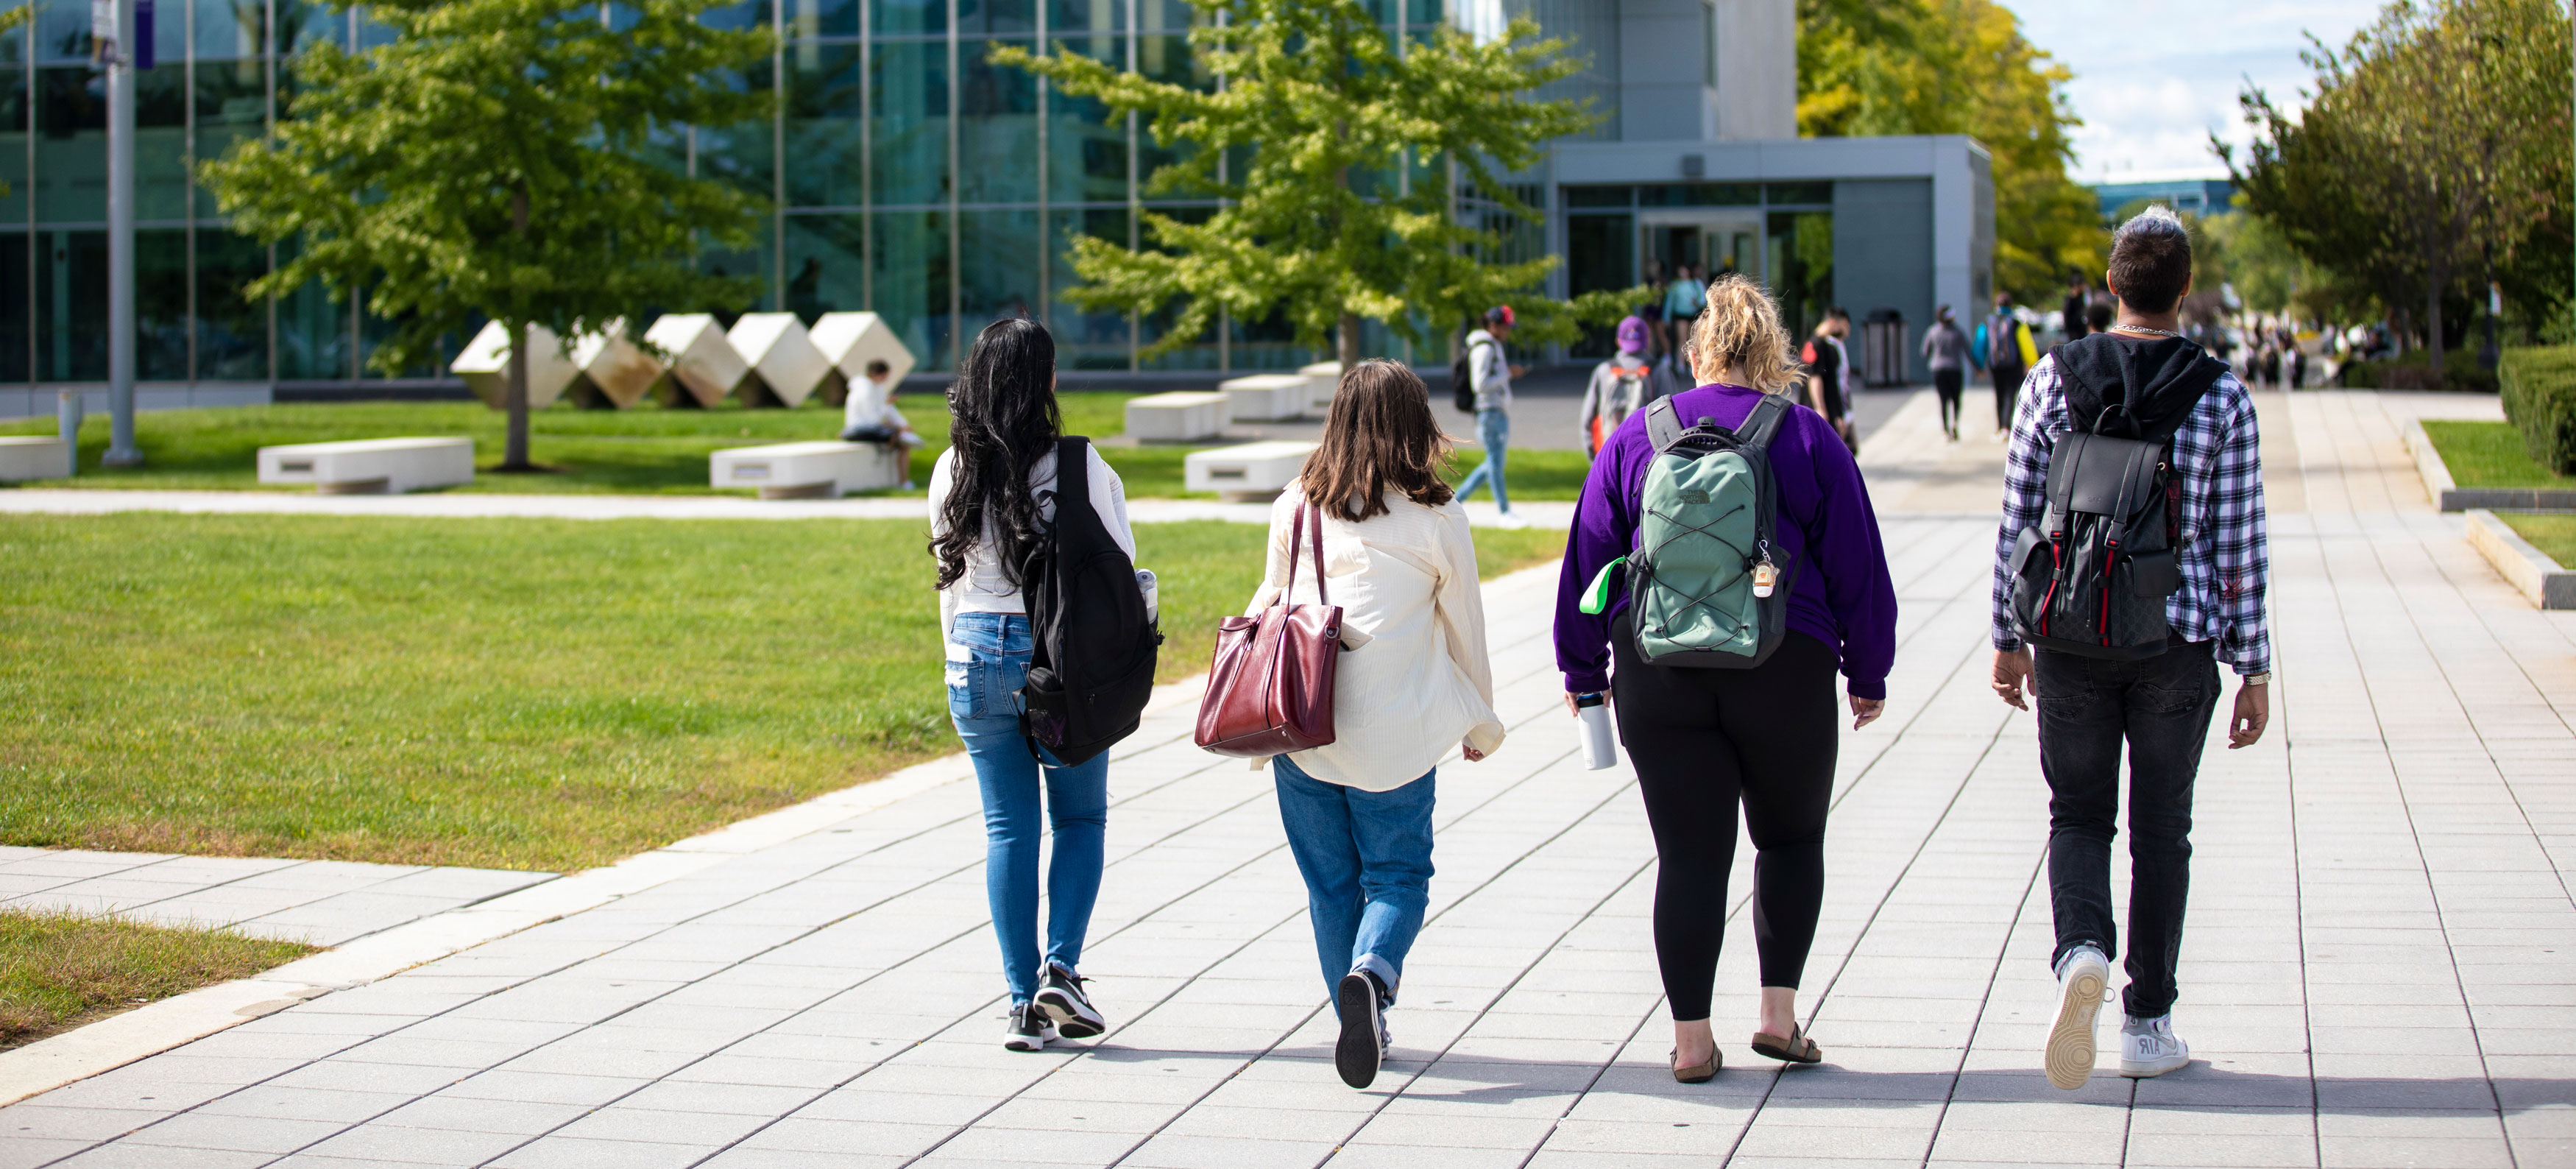 Four students with backpacks walk along a campus pathway on a sunny day. The path is built with pavers and the grass is vibrant green.